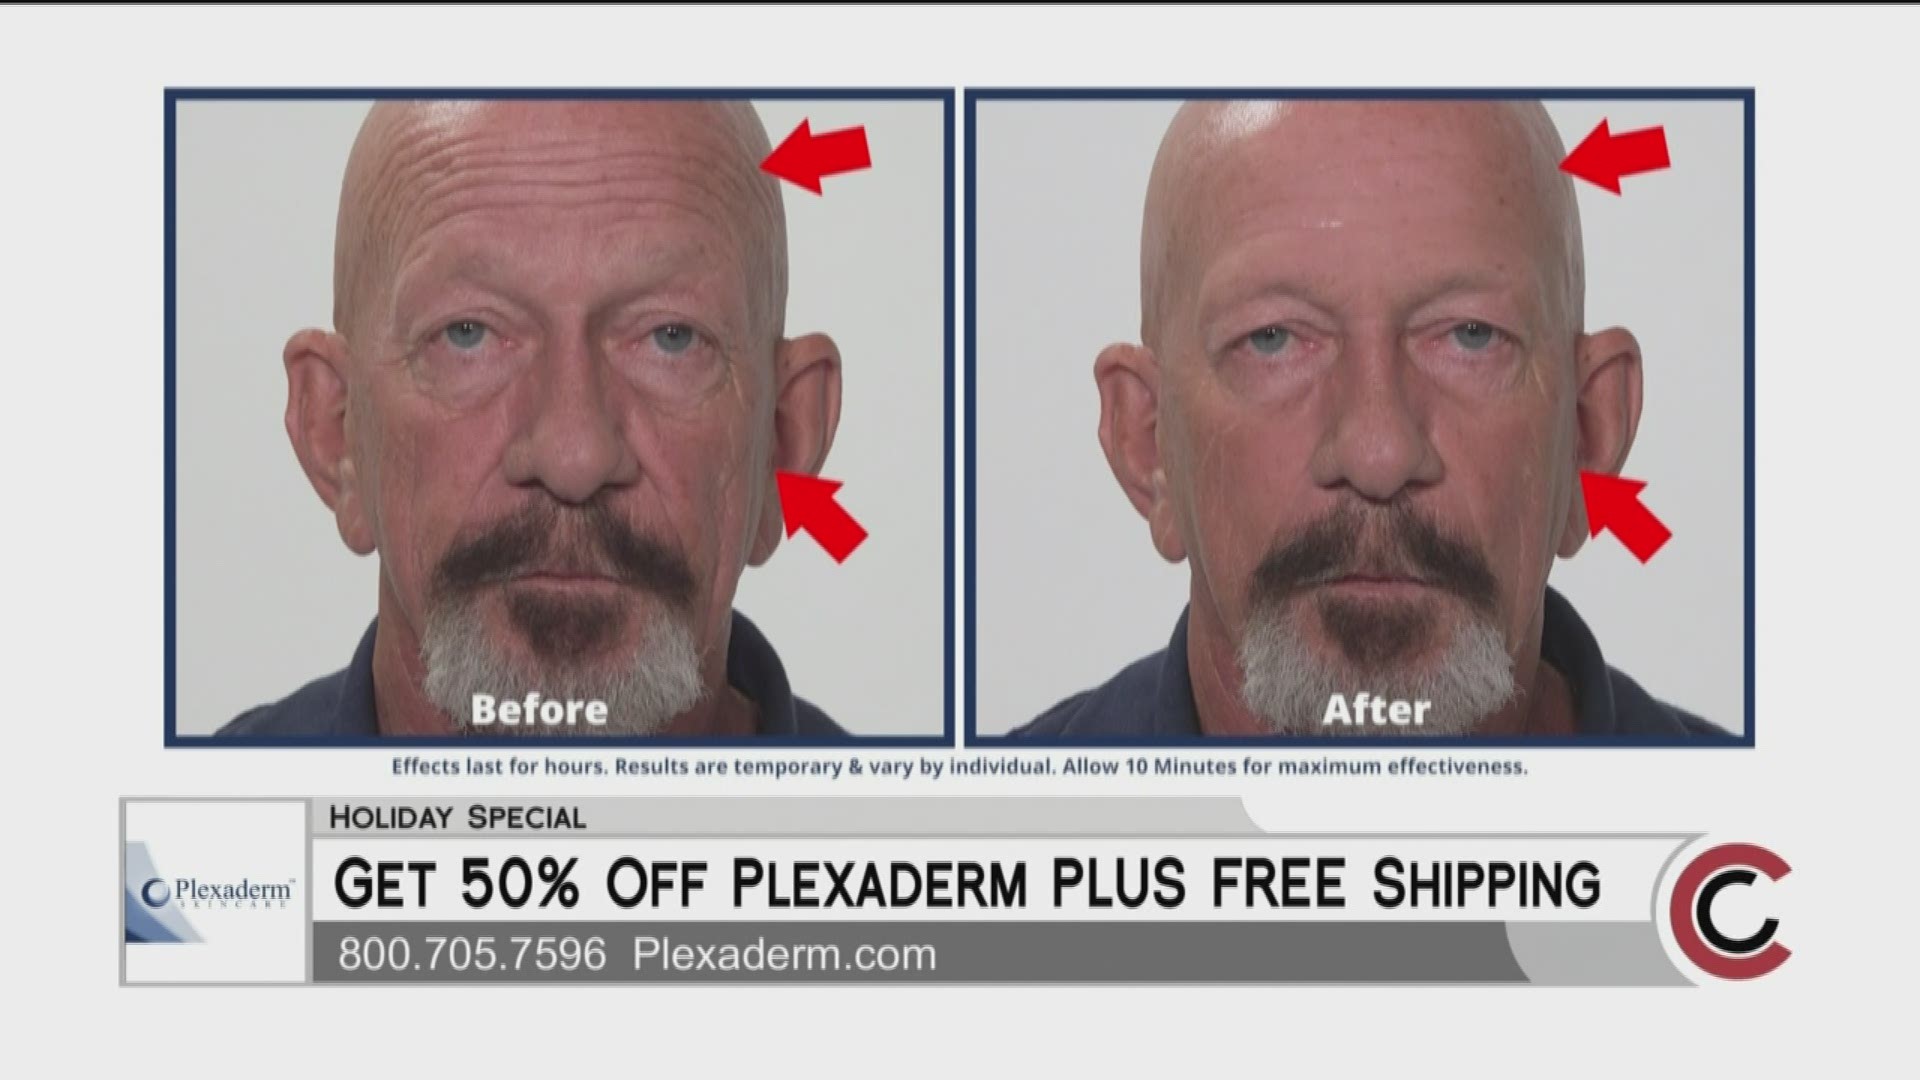 Get Plexaderm now during this great holiday special—50% off, plus free shipping! Order yours at Plexaderm.com or by calling 800.705.7596.